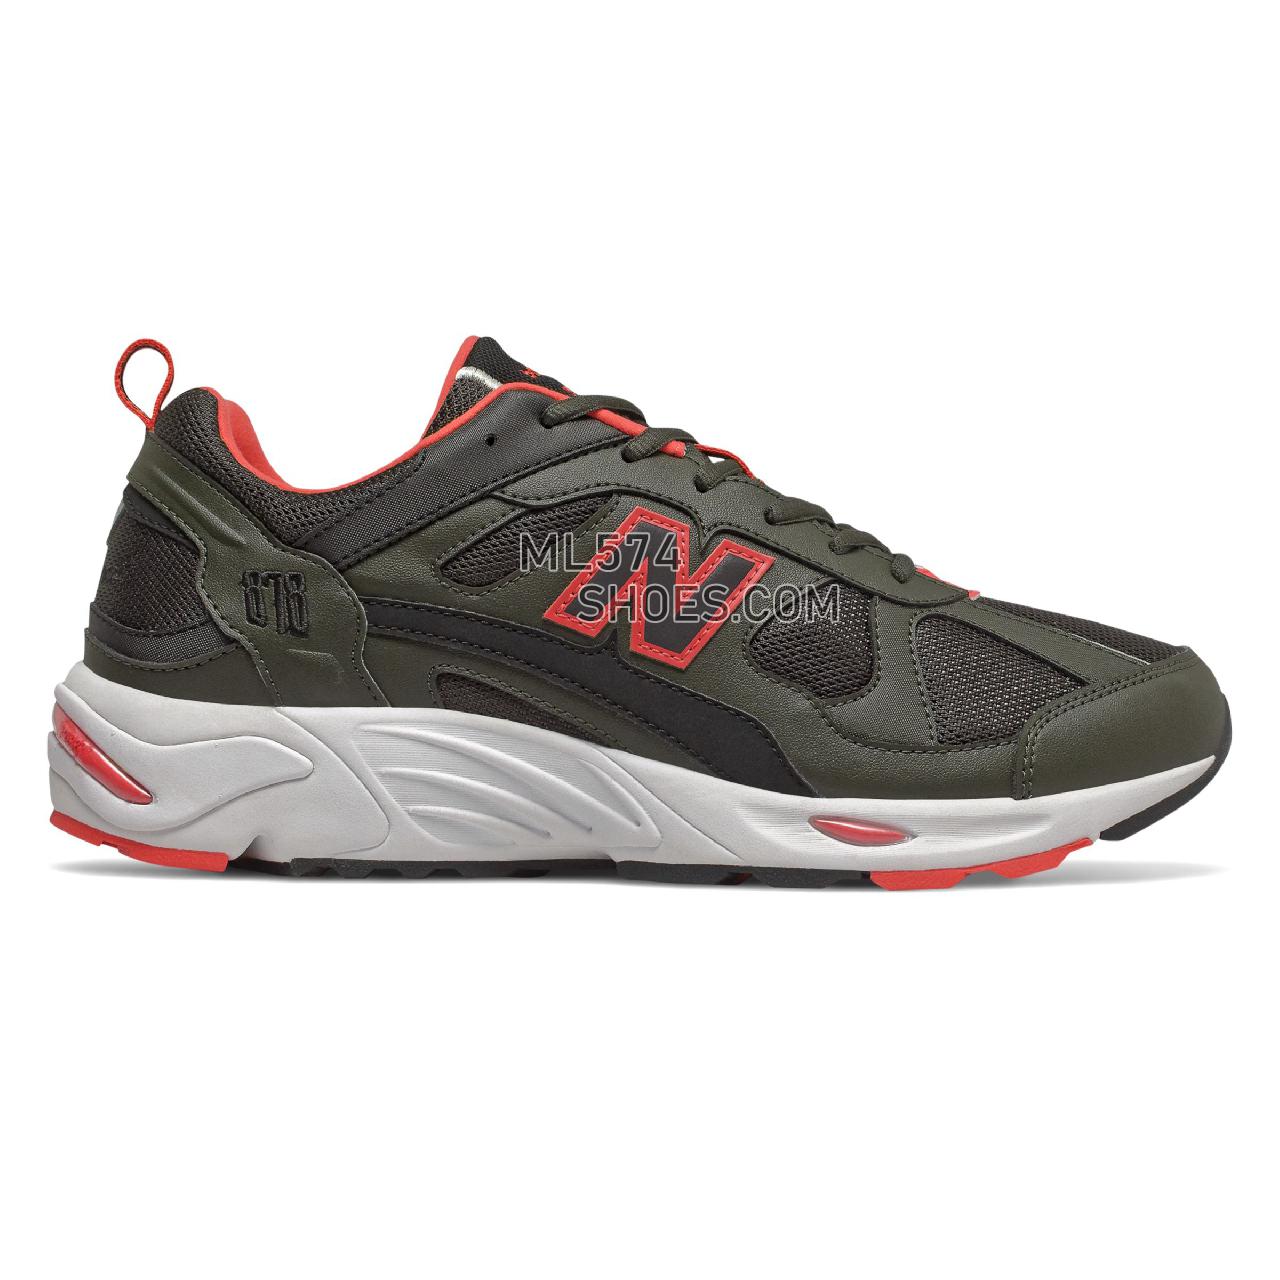 New Balance 878 - Men's 878 - Defense Green with Coral Glow - CM878GC